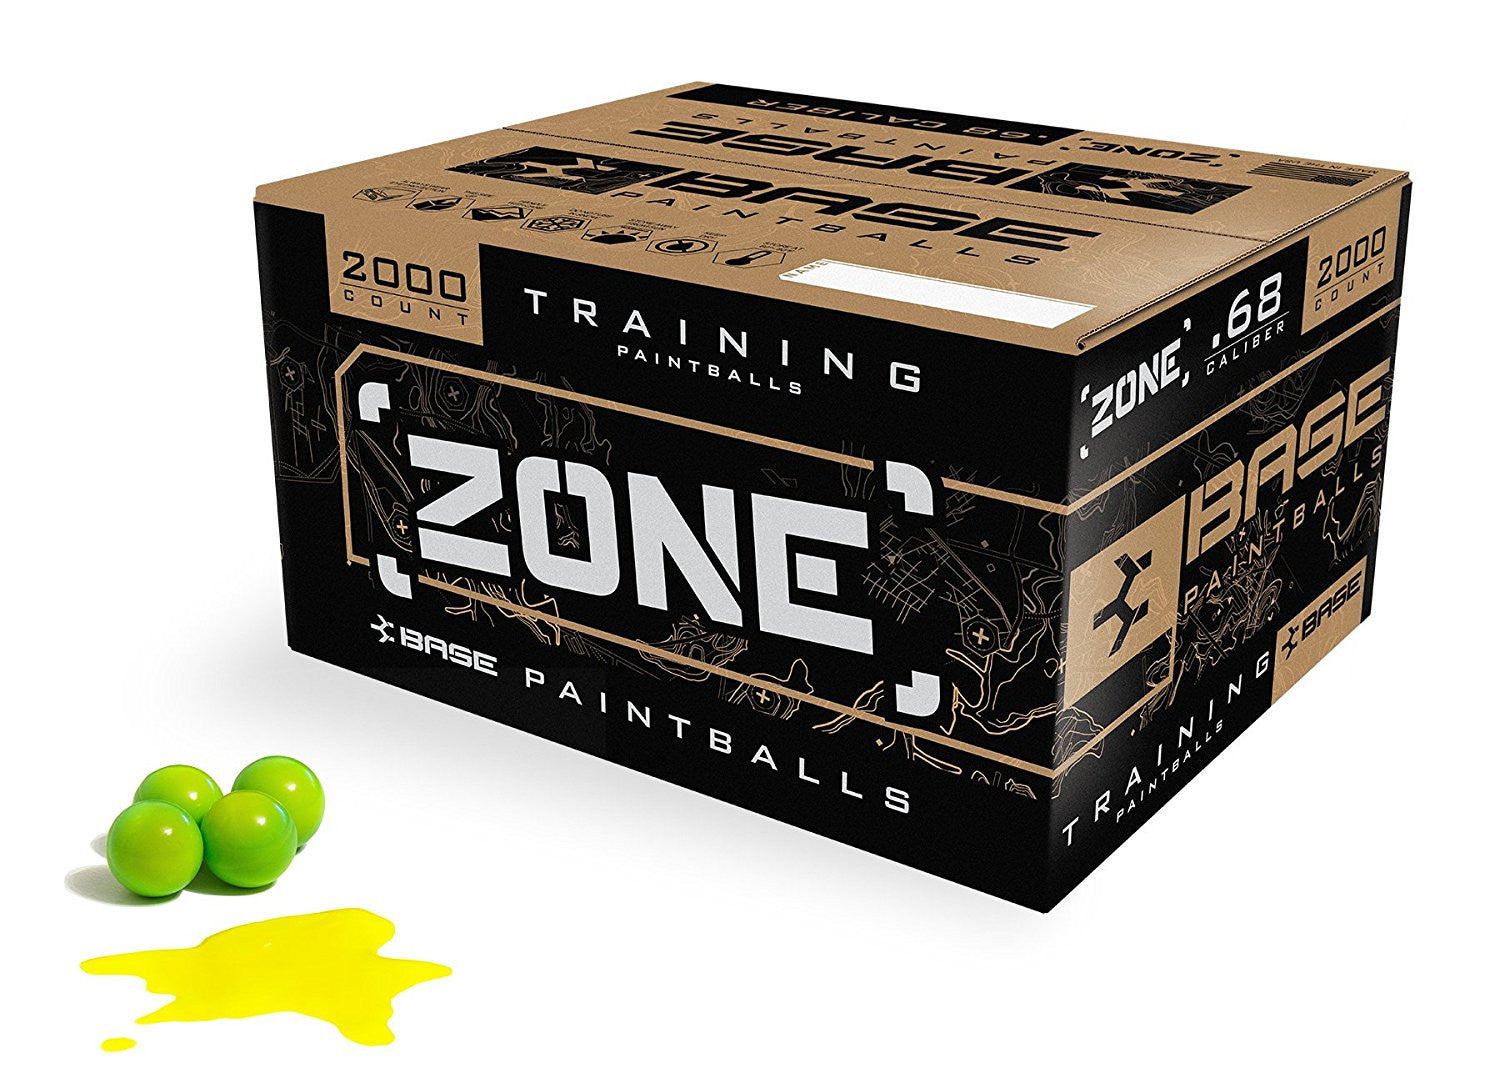 2000 Count Virtue Base Zone Paintballs Lime Shell Yellow Fill - Virtue